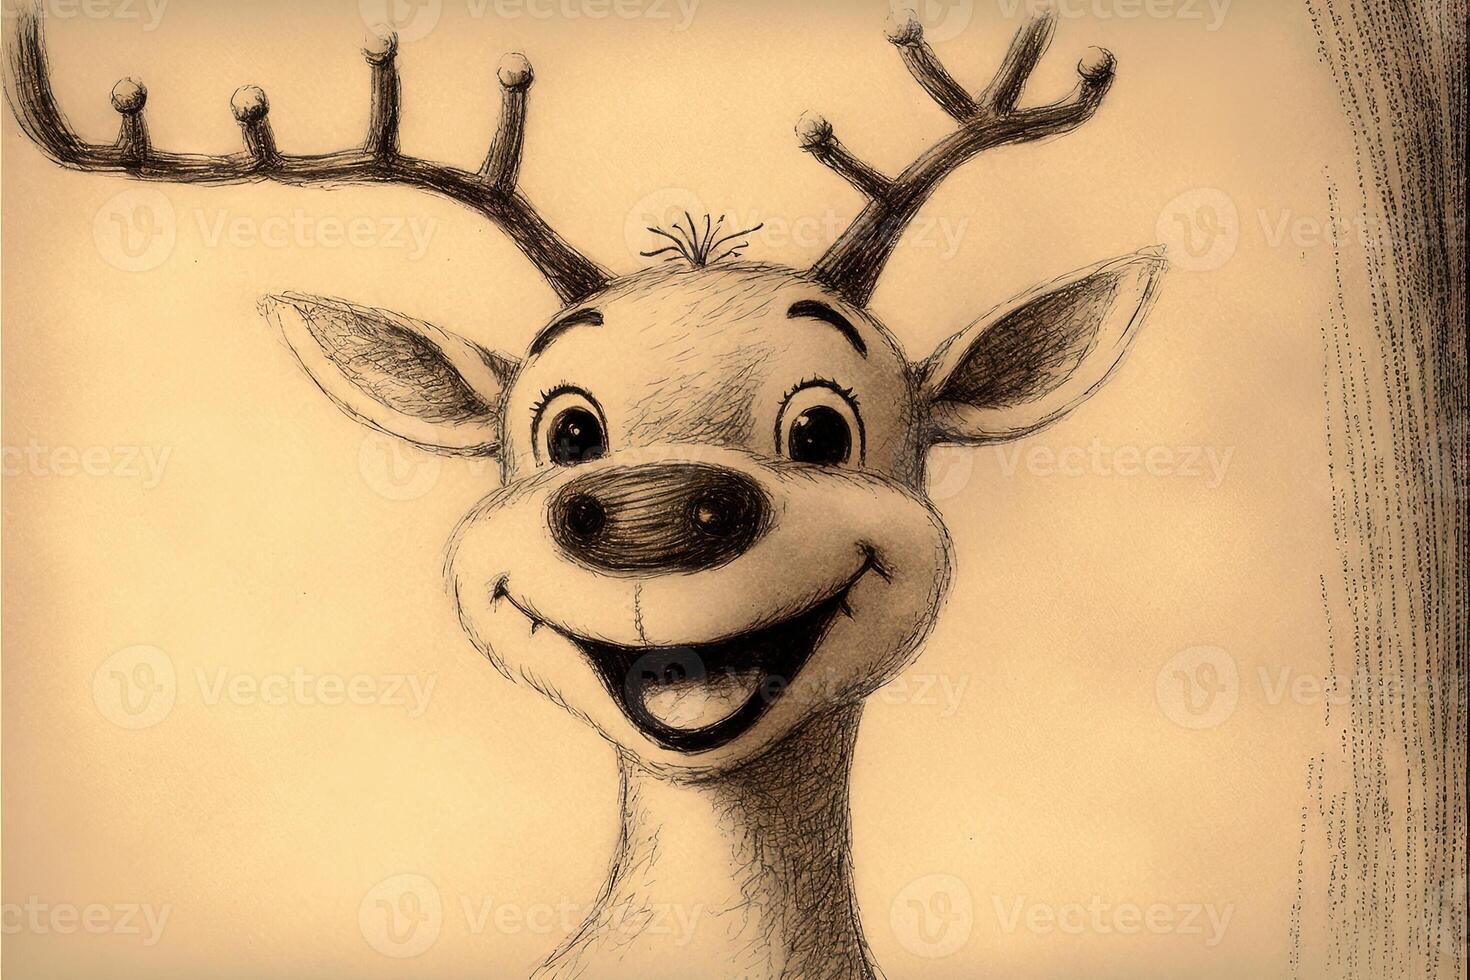 Rudolph the Red-nosed Reindeer illustration, Christmas concept adorable sketch photo